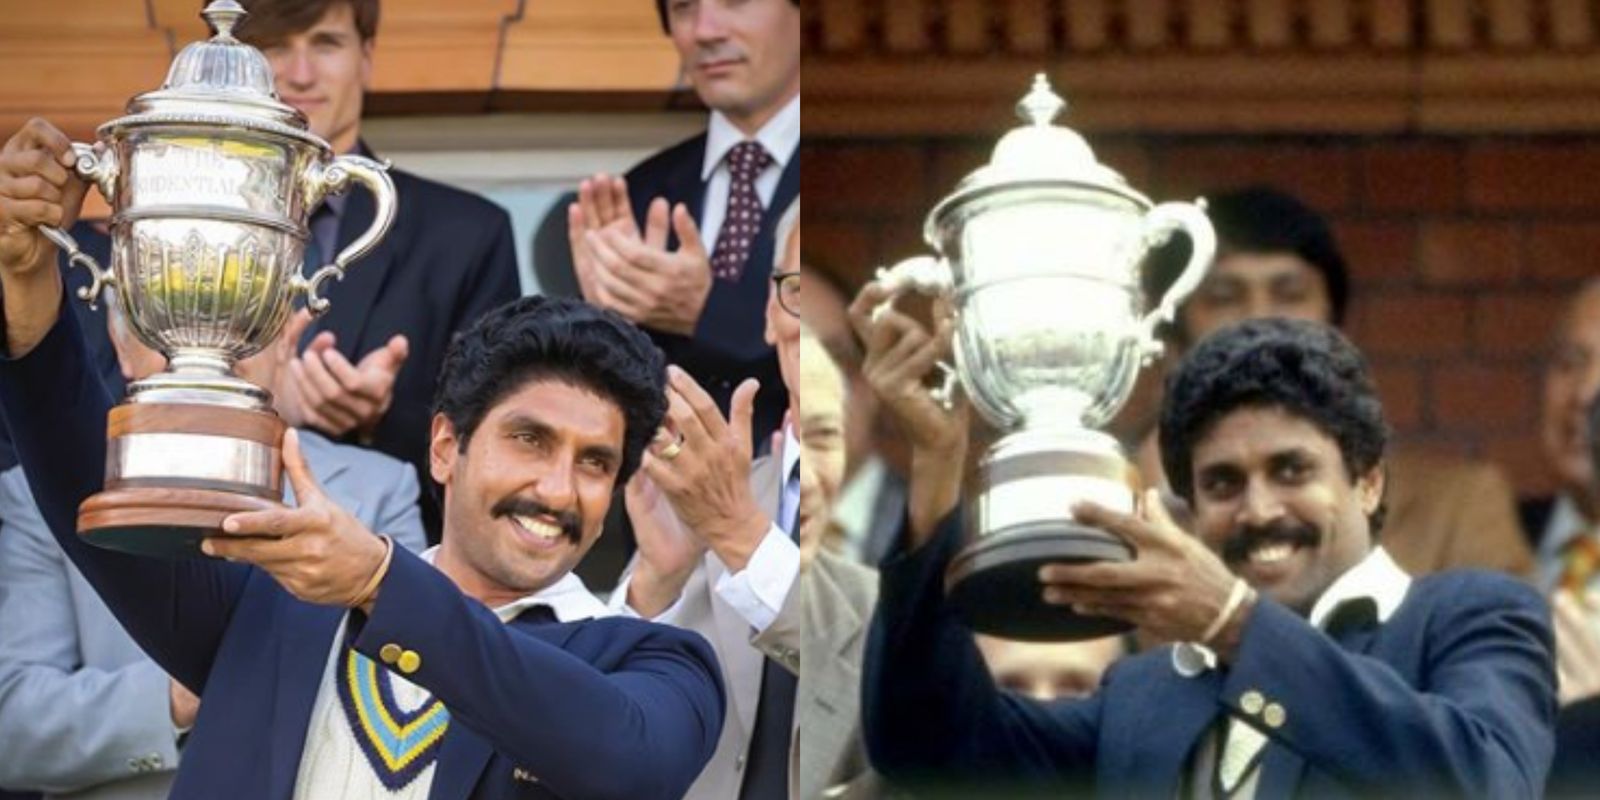  ‘83: Ranveer Singh Recreates The Iconic Moment When Kapil Dev Lifted The 1983 World Cup Trophy